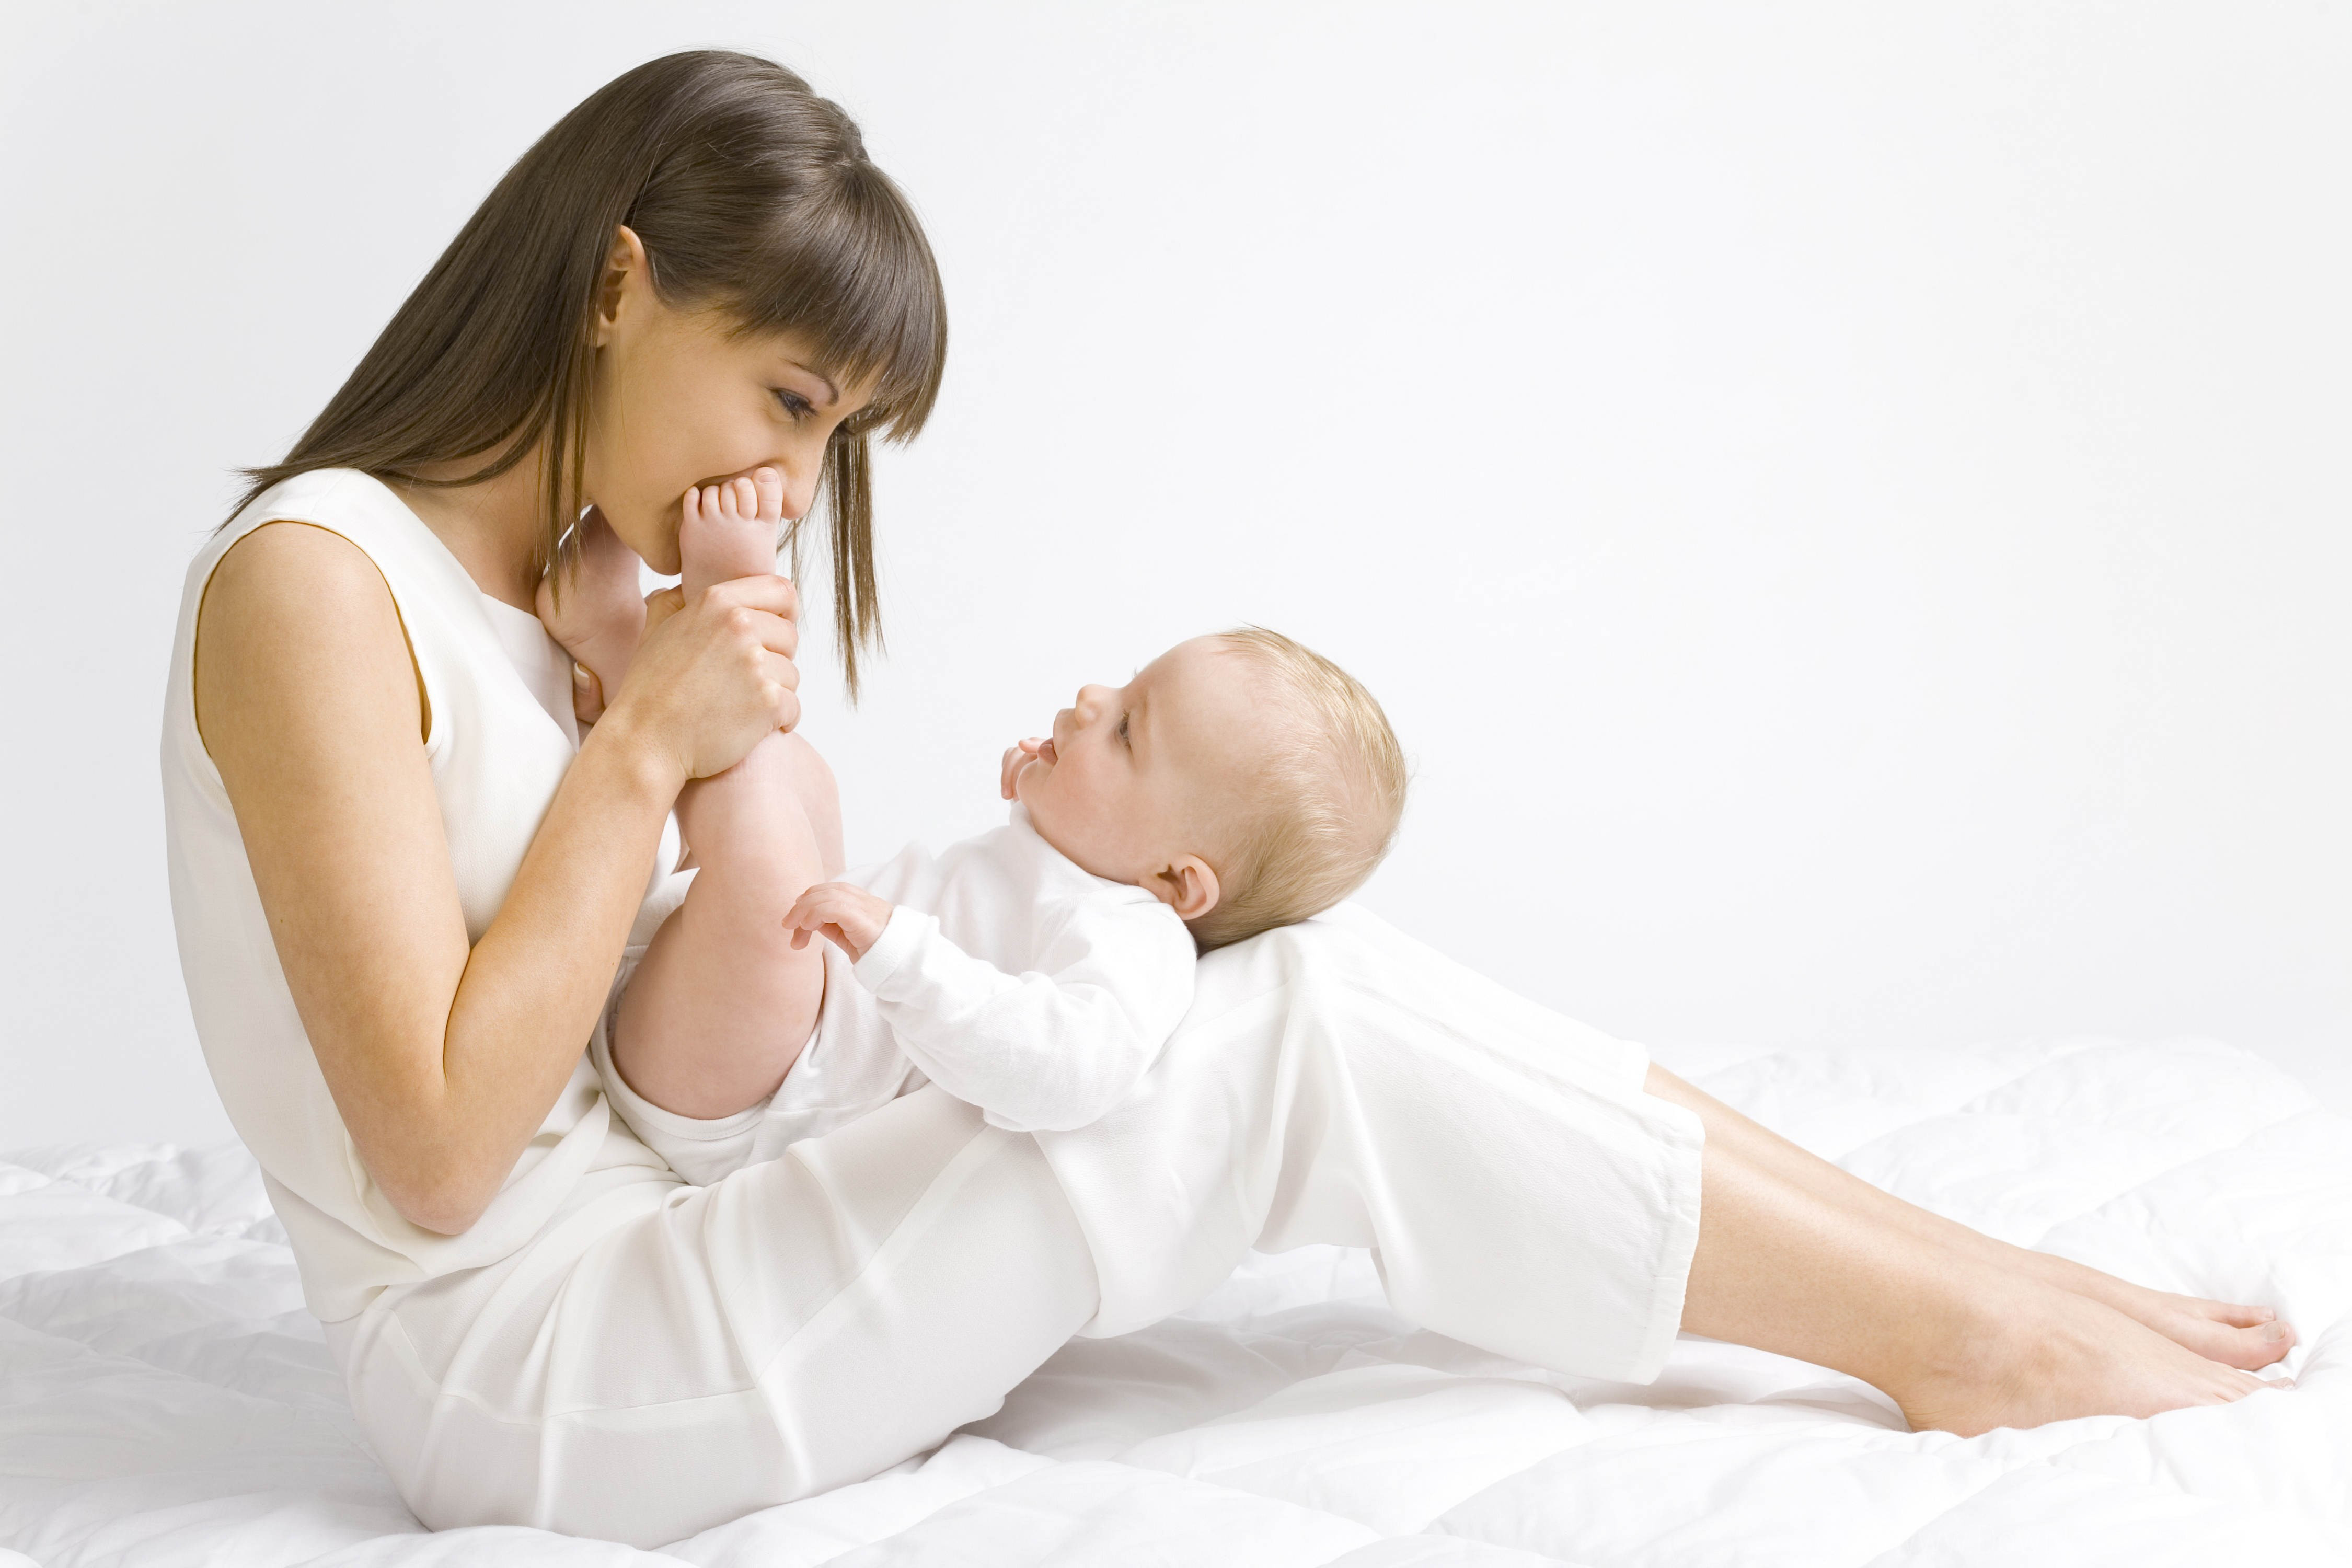 Being A Single Mother: How You Can Build Up A New Relationship